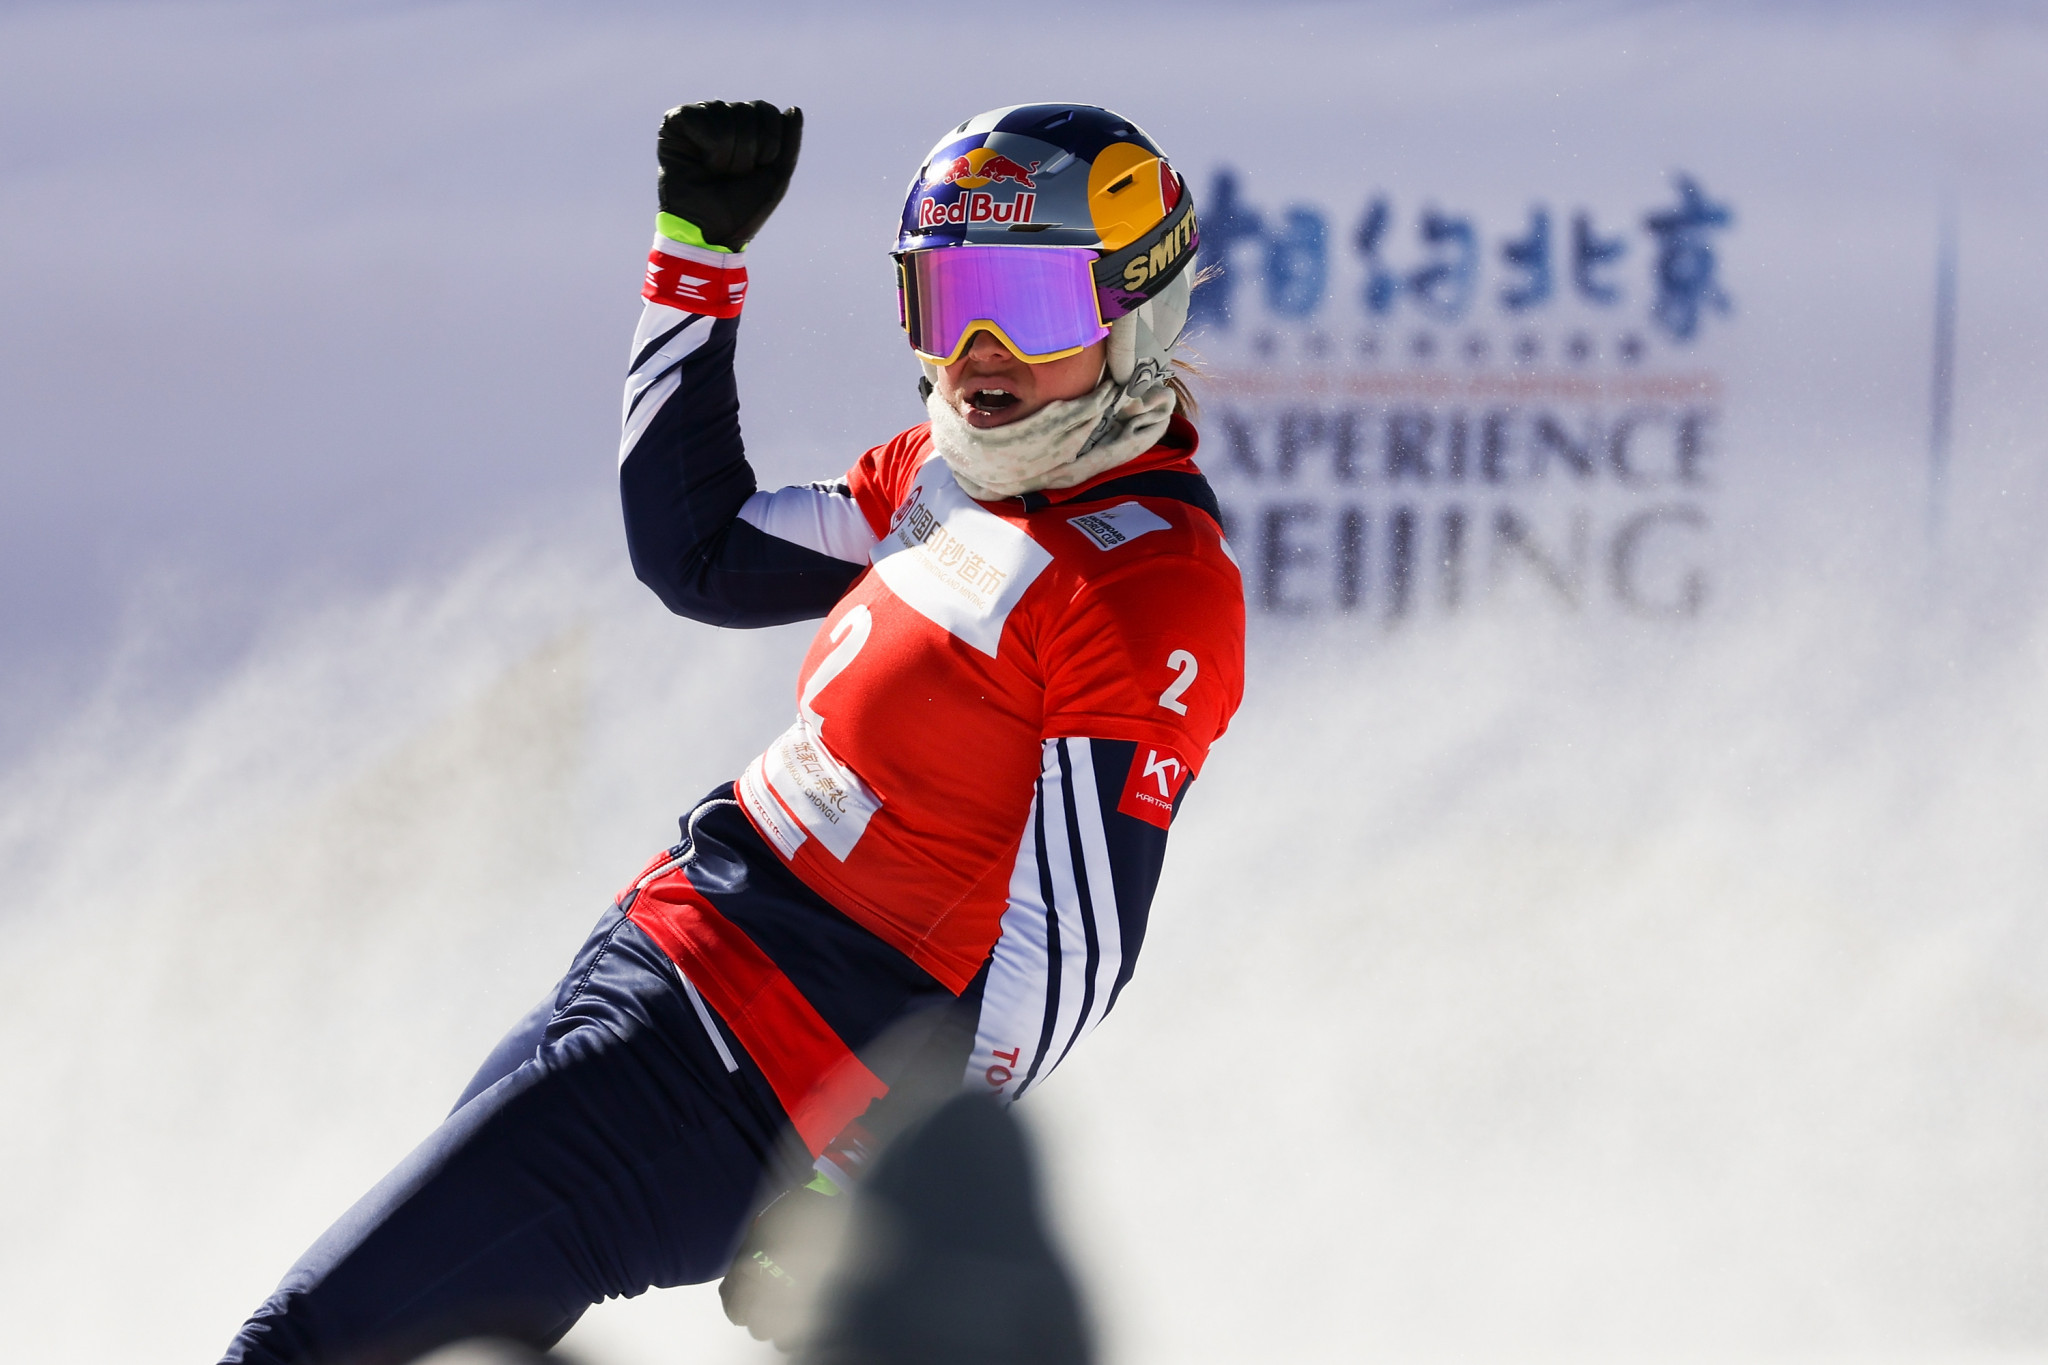 Two-time Olympic medallist Samková wins Snowboard Cross World Cup at Beijing 2022 venue